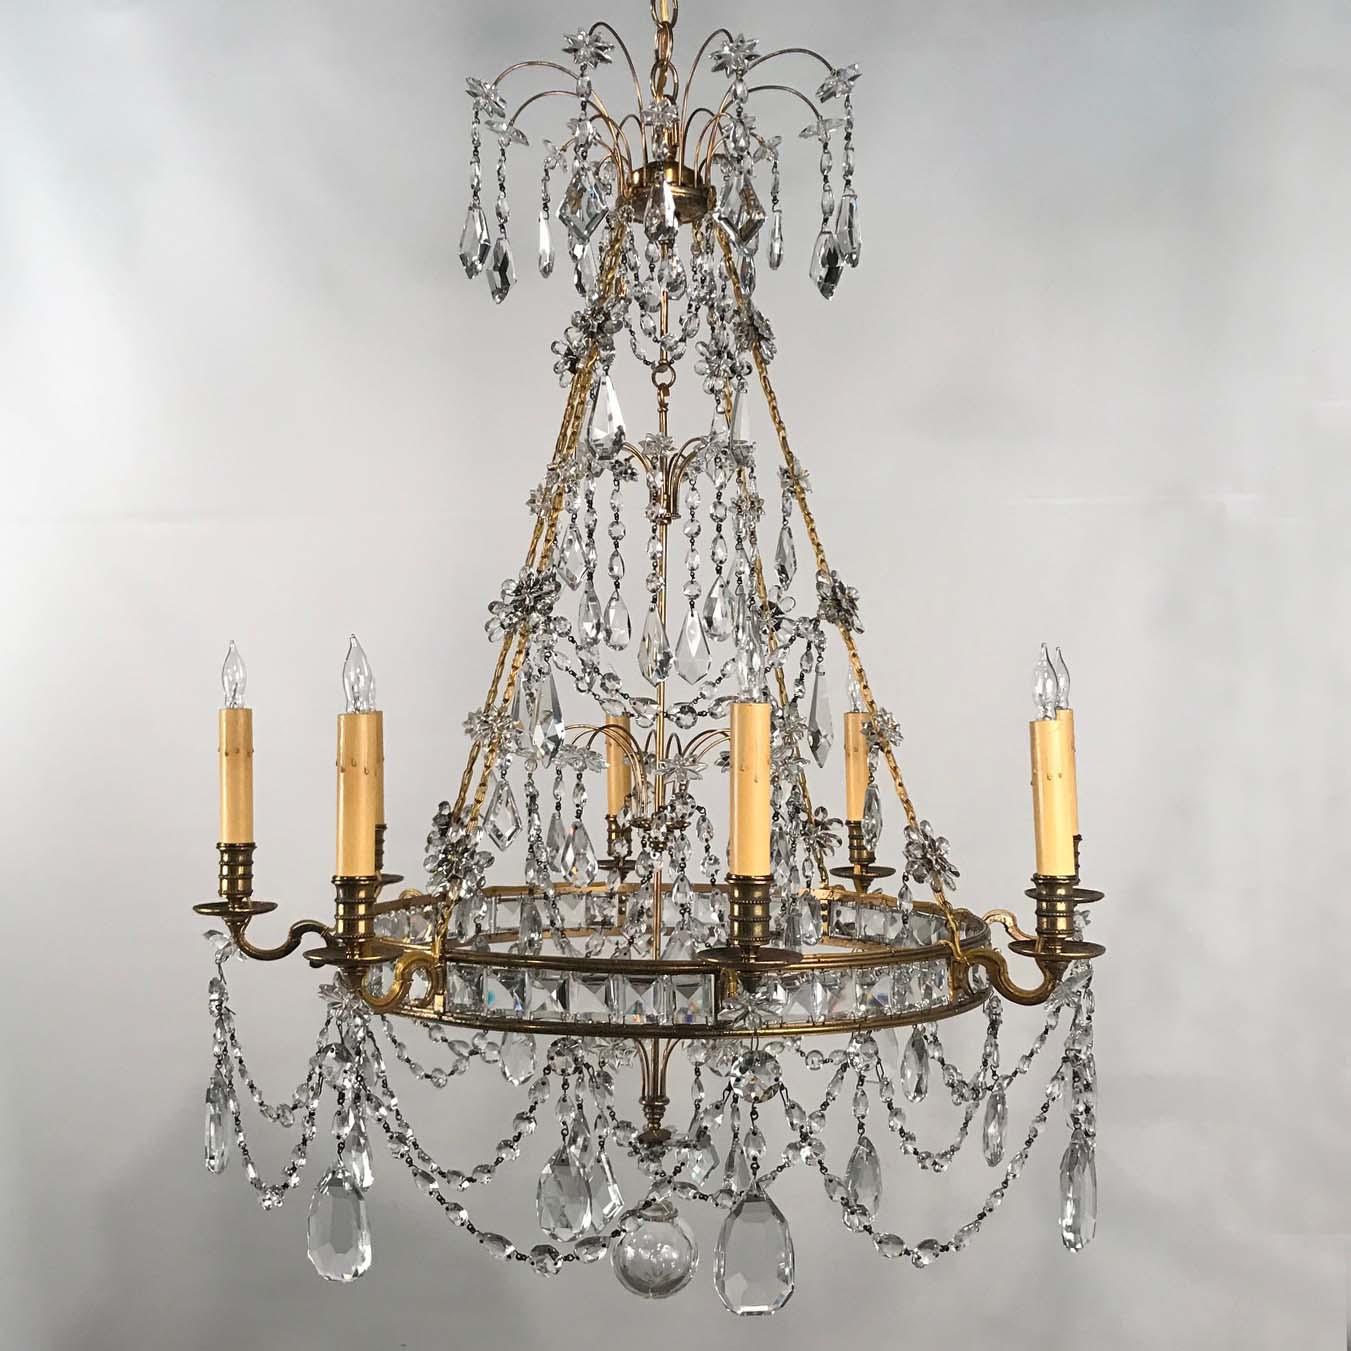 This is a most unusual chandelier. The central band is set with square faceted prisms and supports eight arms, now electrified. There is a considerable variety of quality crystals, some of flower- head-form, some Swedish pendalogues, some garlands.